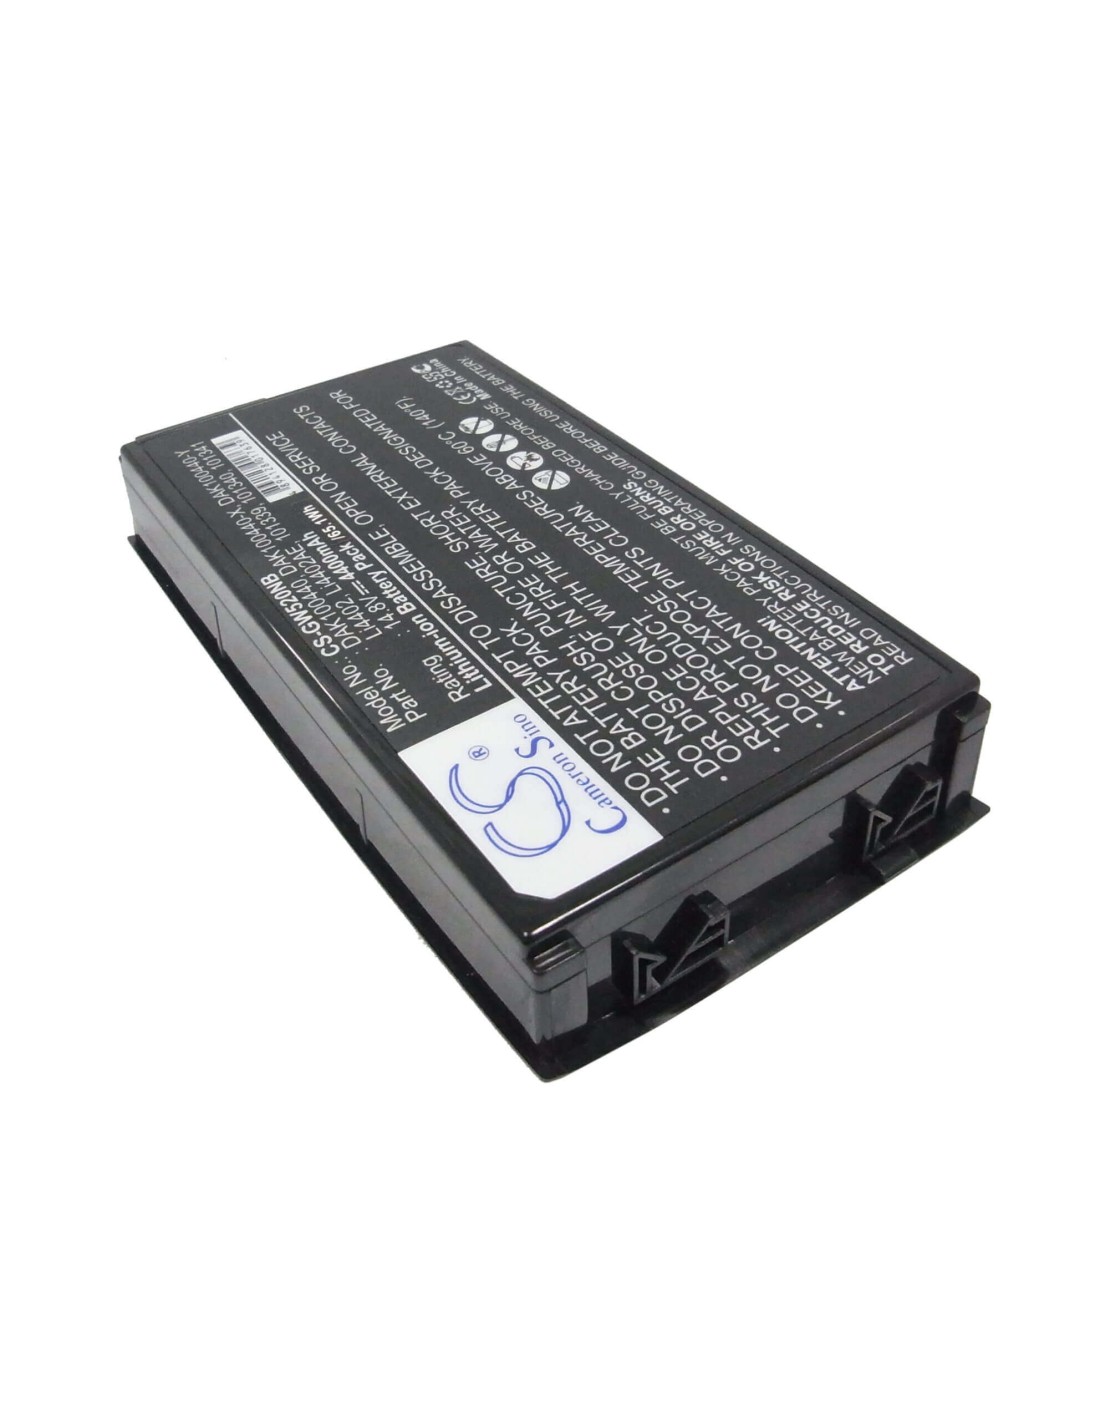 Black Battery for Arima W730a 14.8V, 4400mAh - 65.12Wh